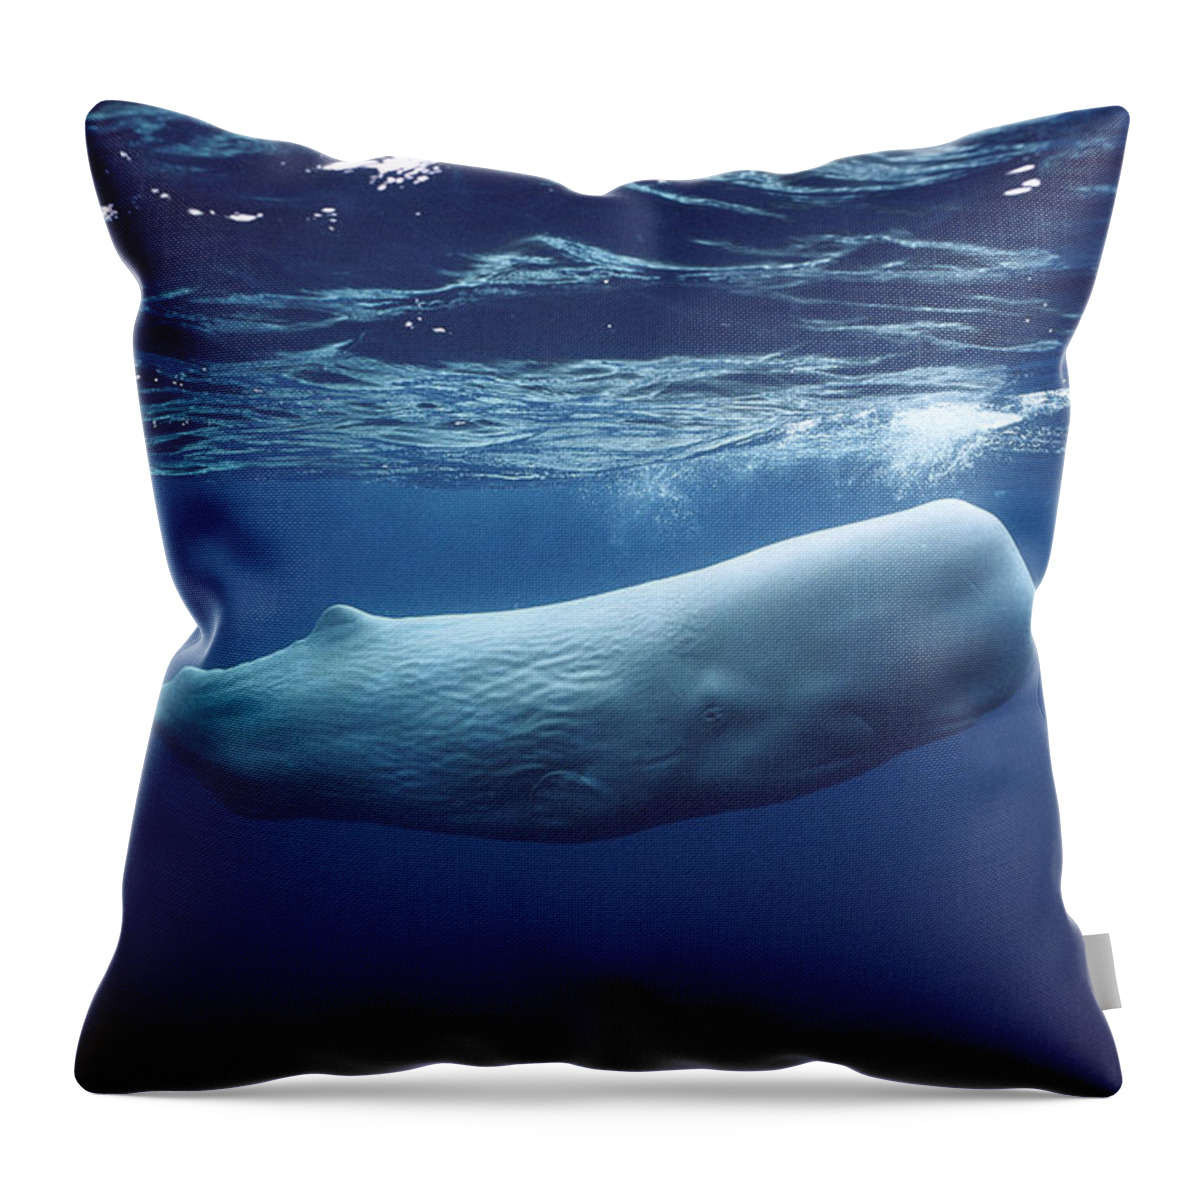 00270022 Throw Pillow featuring the photograph White Sperm Whale #1 by Hiroya Minakuchi